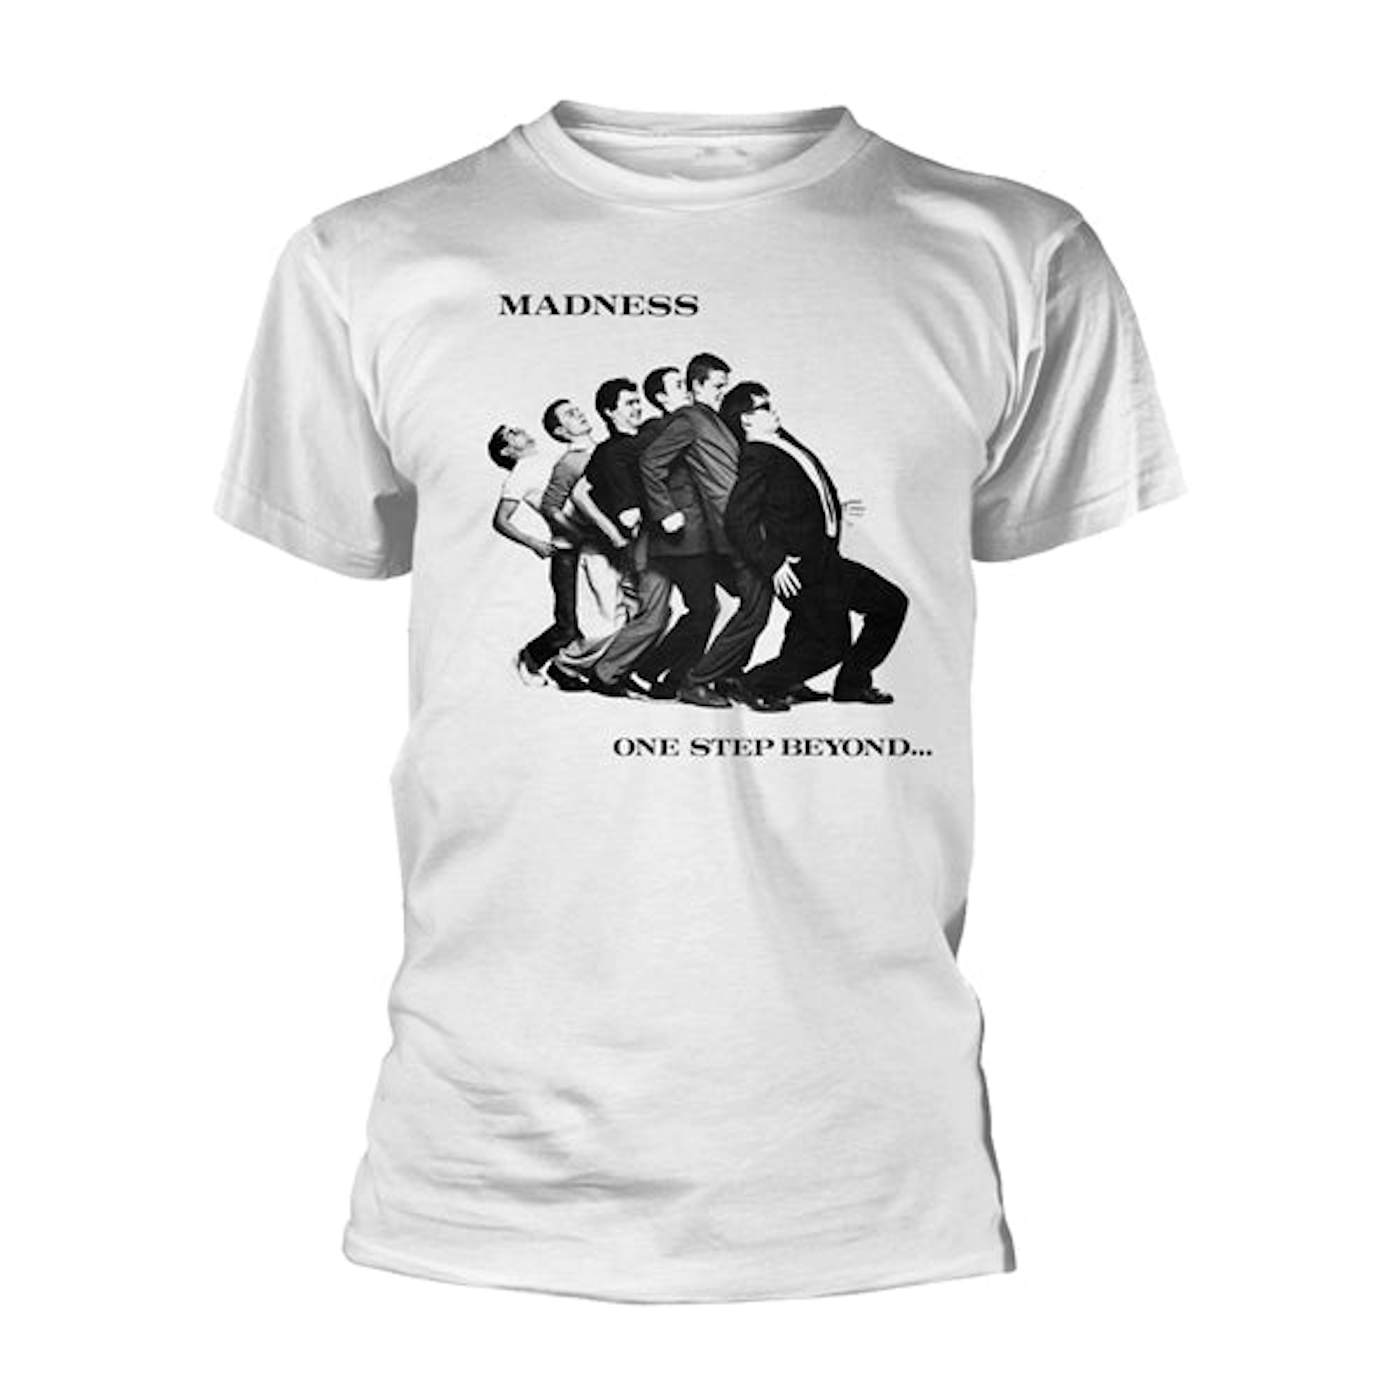 Madness T-Shirt - One Step Beyond